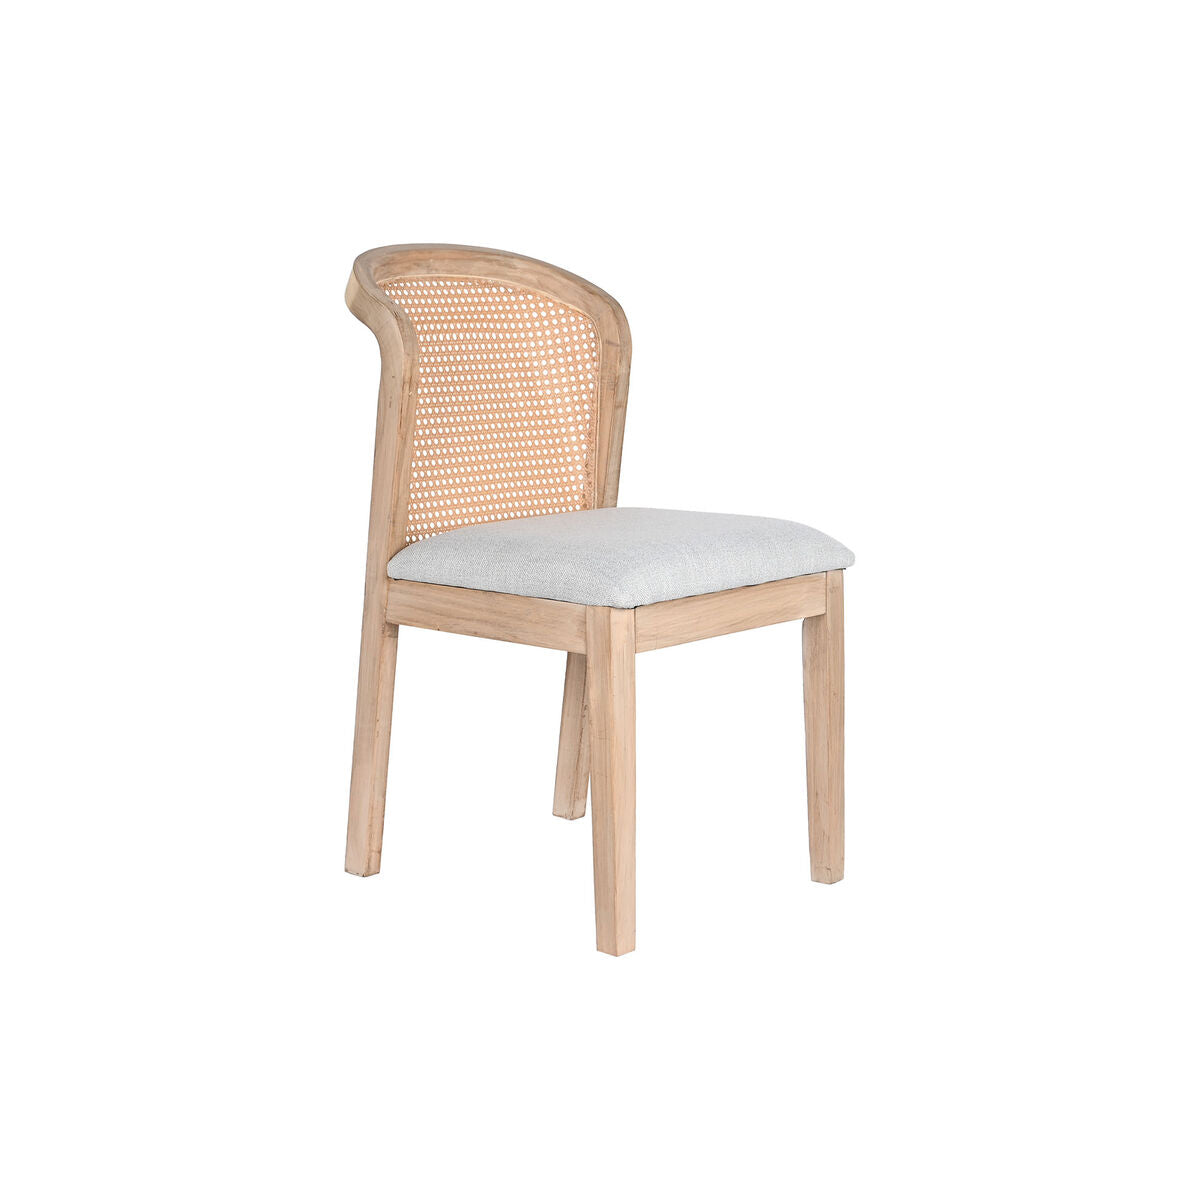 Dark Grey Dining Chair in Wood and Rattan (46 x 61 x 86 cm)